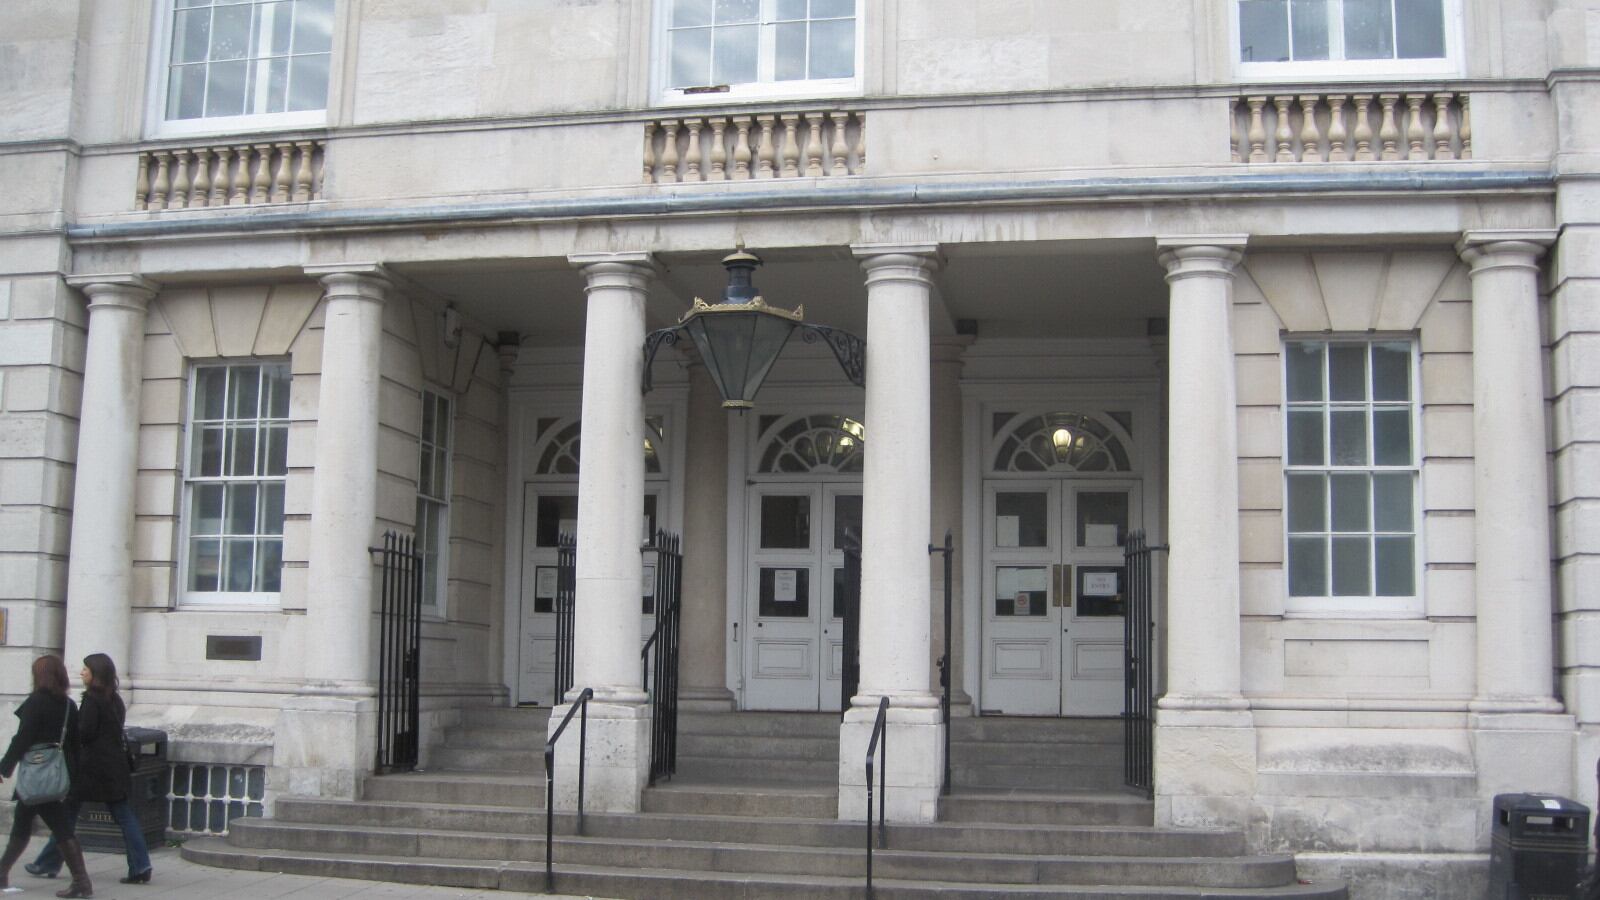 The trial continues at Lewes Crown Court